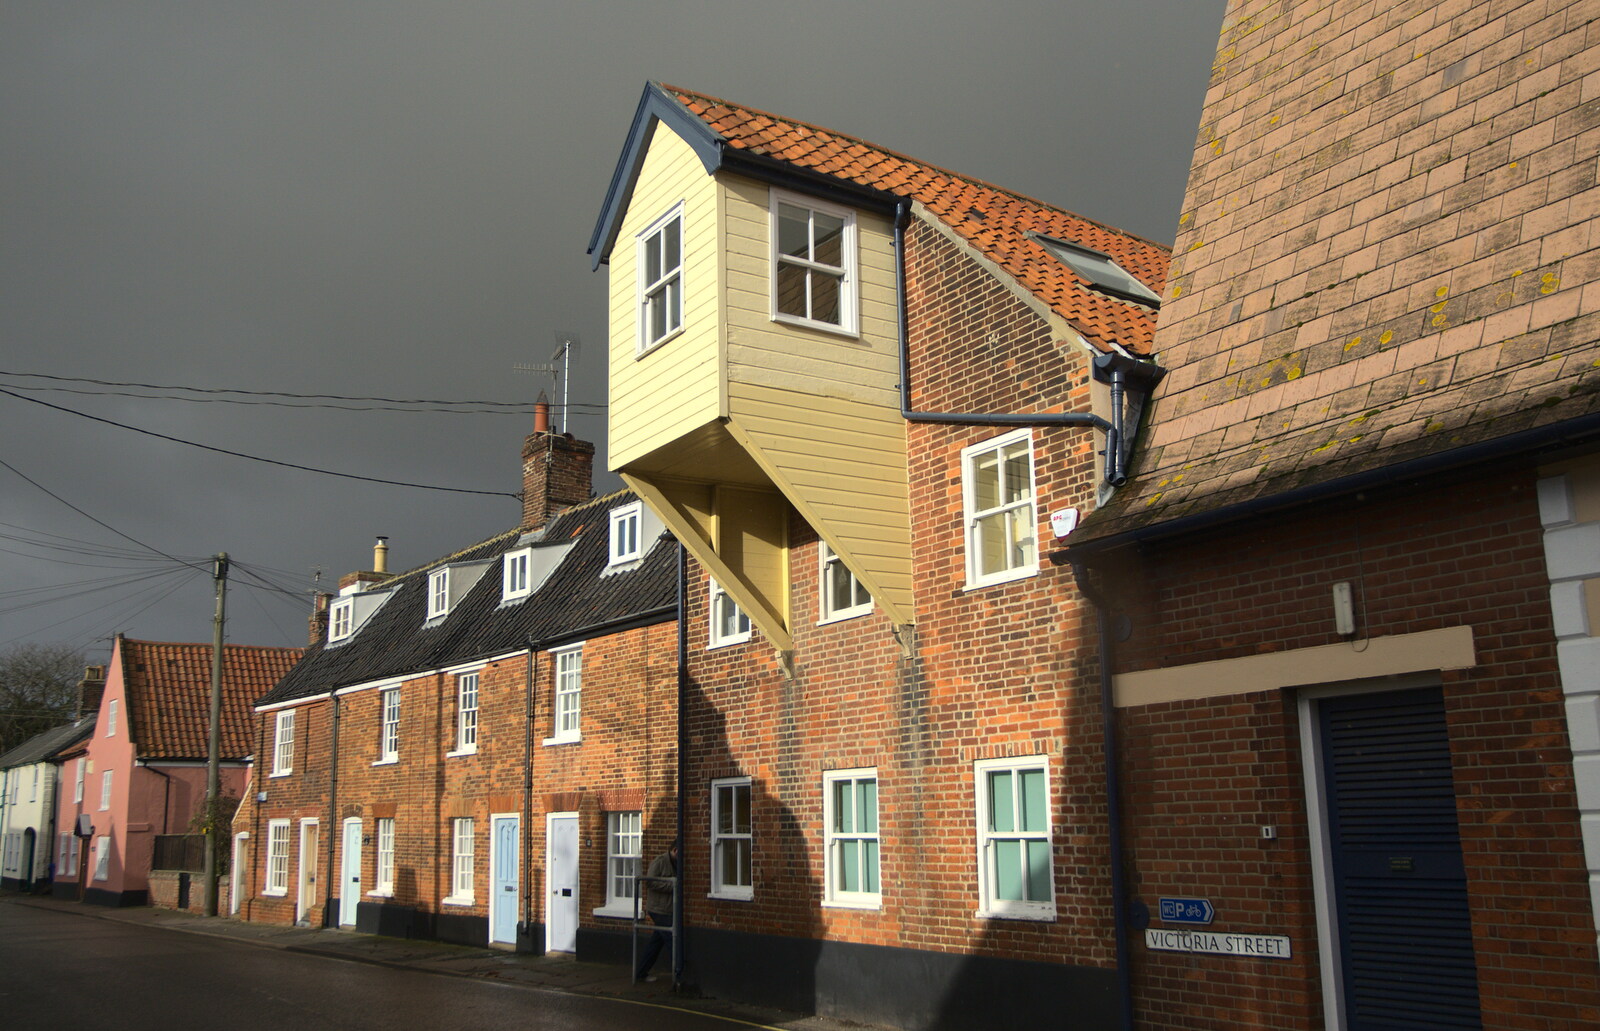 Old buildings and dark skies on Victoria Street from Apple's Adnams Brewery Birthday Tour, Southwold, Suffolk - 29th November 2012